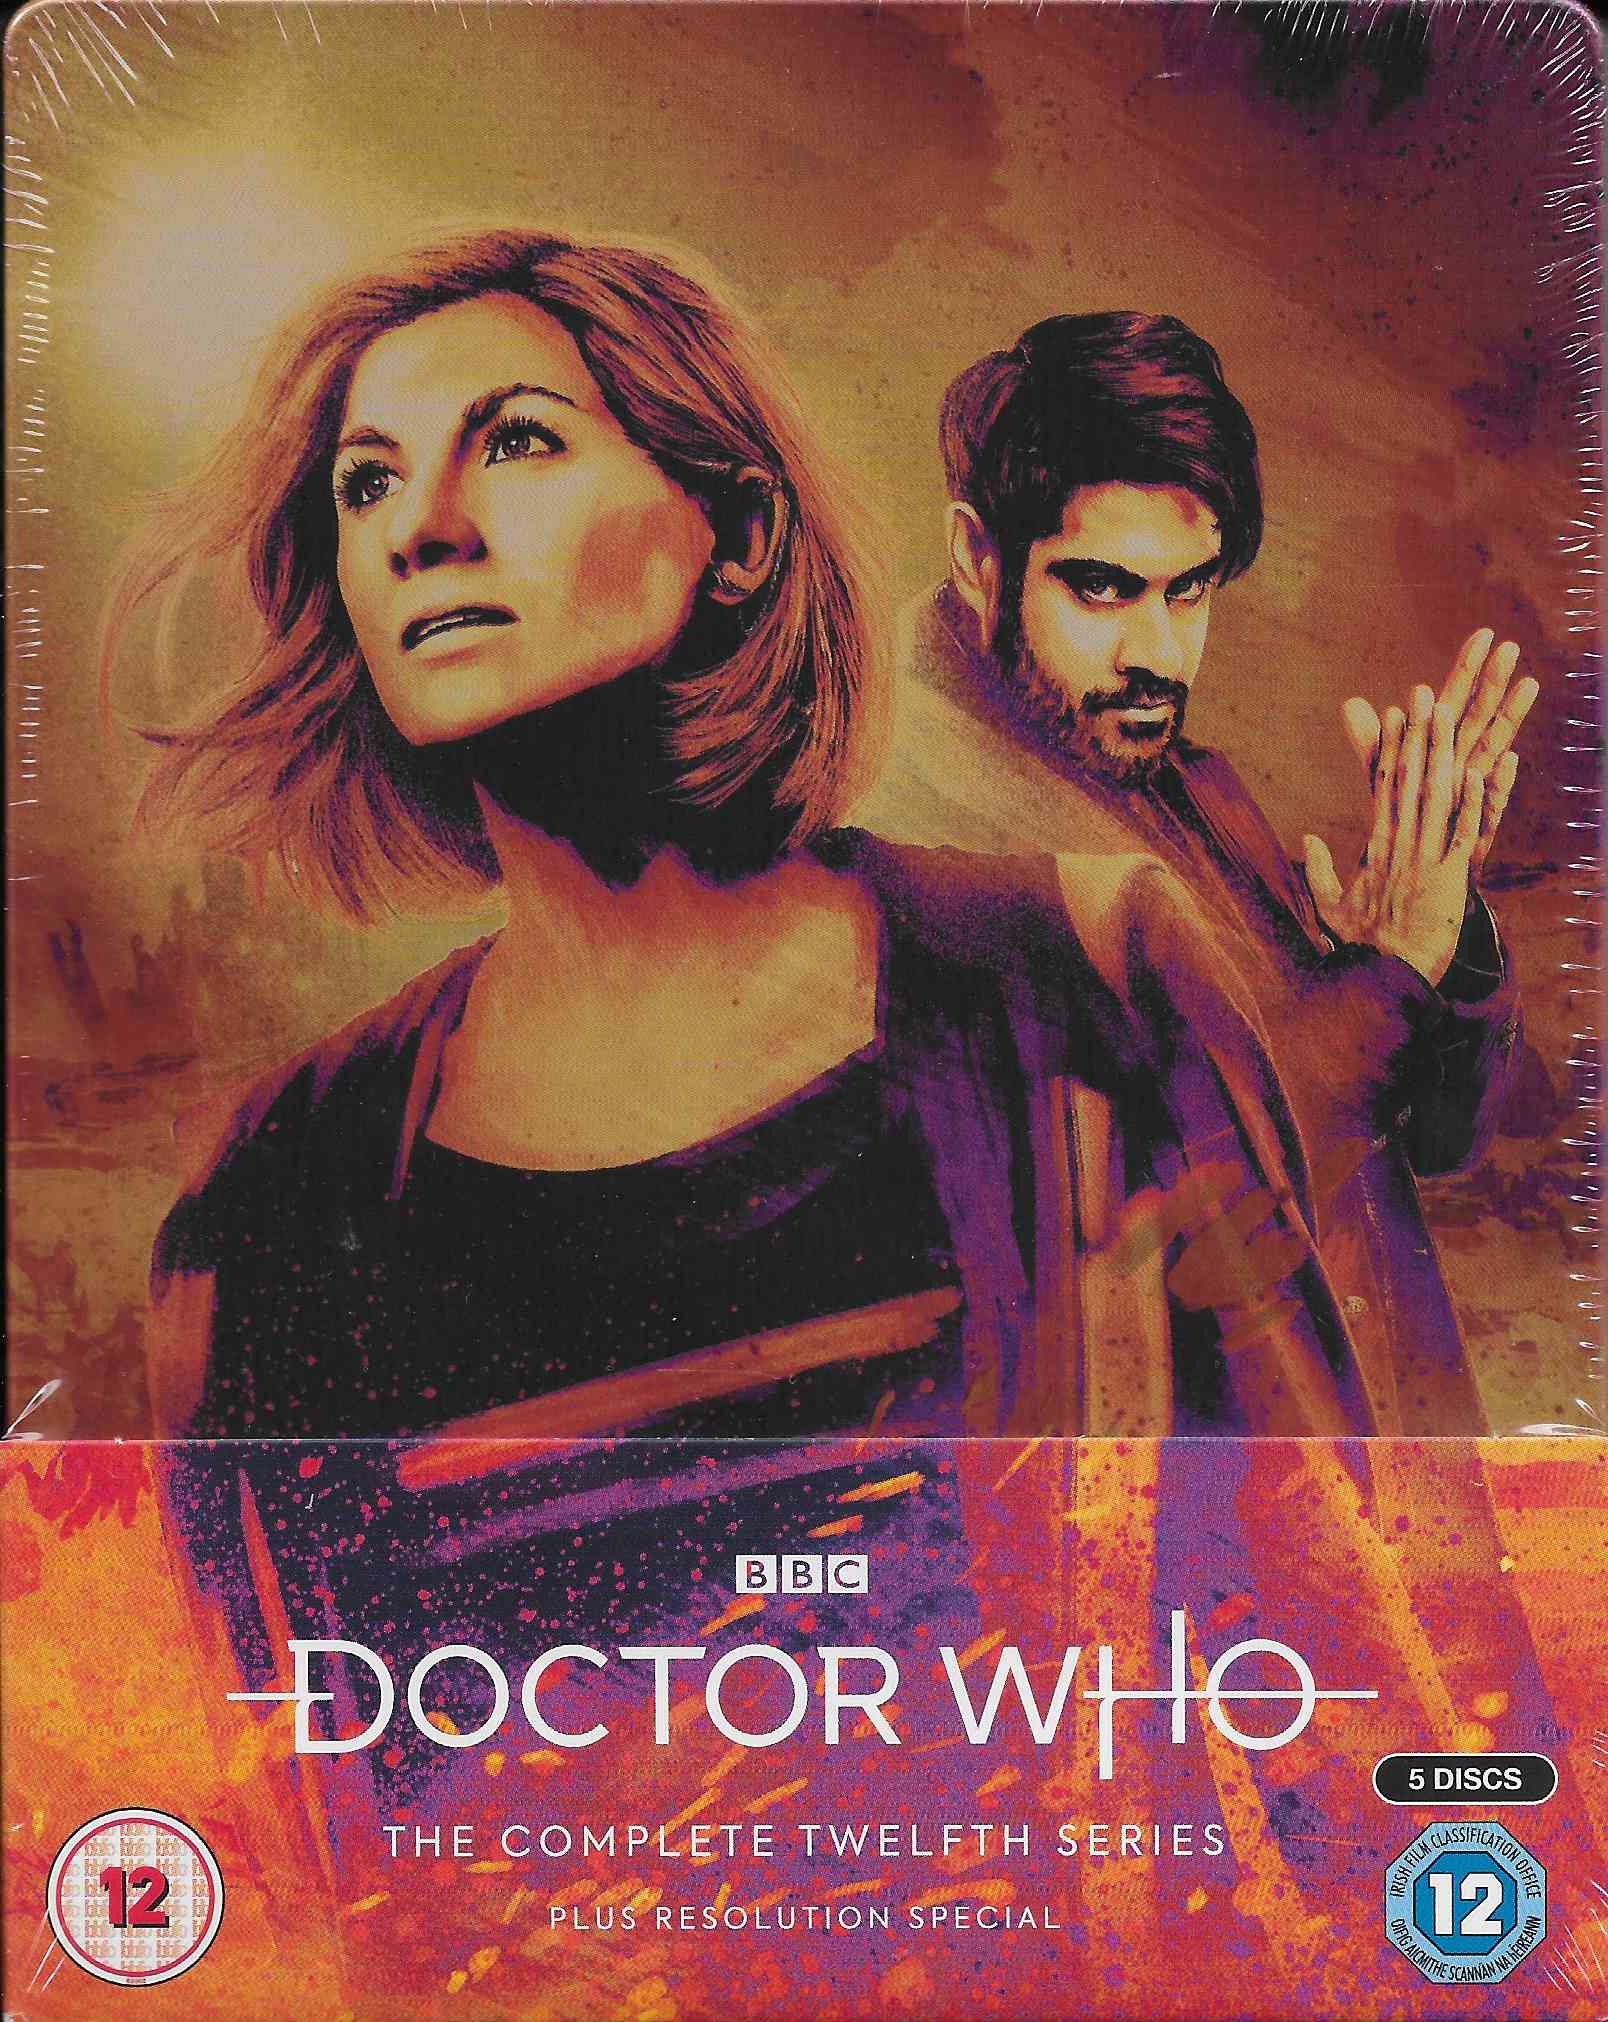 Picture of BBCBD 0498 Doctor Who - The complete twelfth series by artist Chris Chibnall / Ed Hime / Nina Metivier / Vinay Patel / Pete McTighe / Charlene James / Maxine Alderton from the BBC records and Tapes library